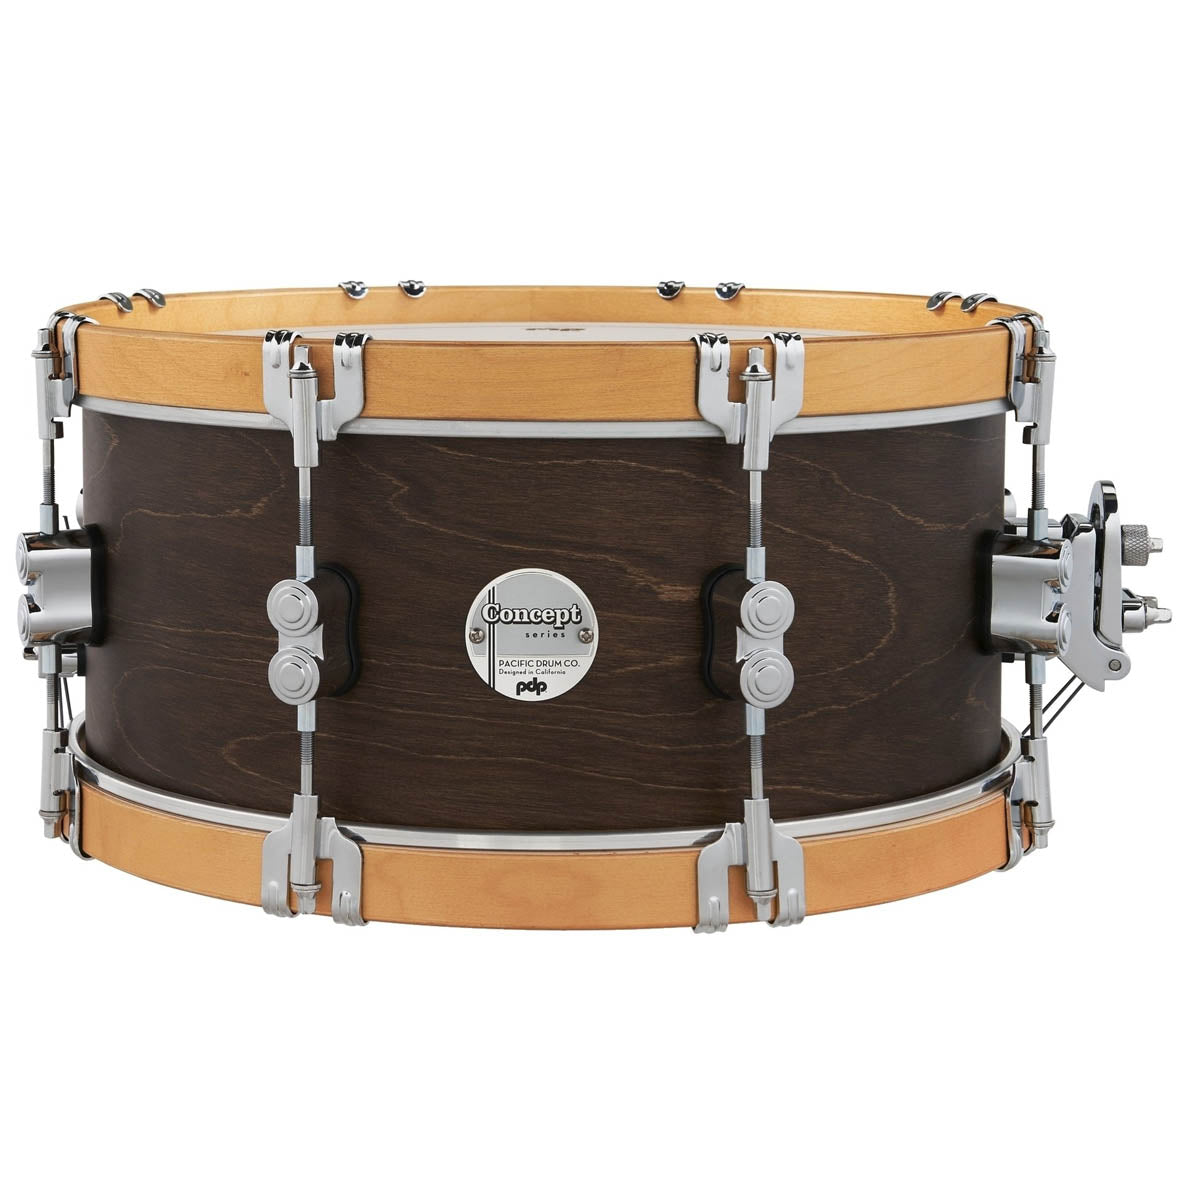 PDP by DW Concept Classic 14"x6.5" Snare Drum with Wood Hoops in Walnut